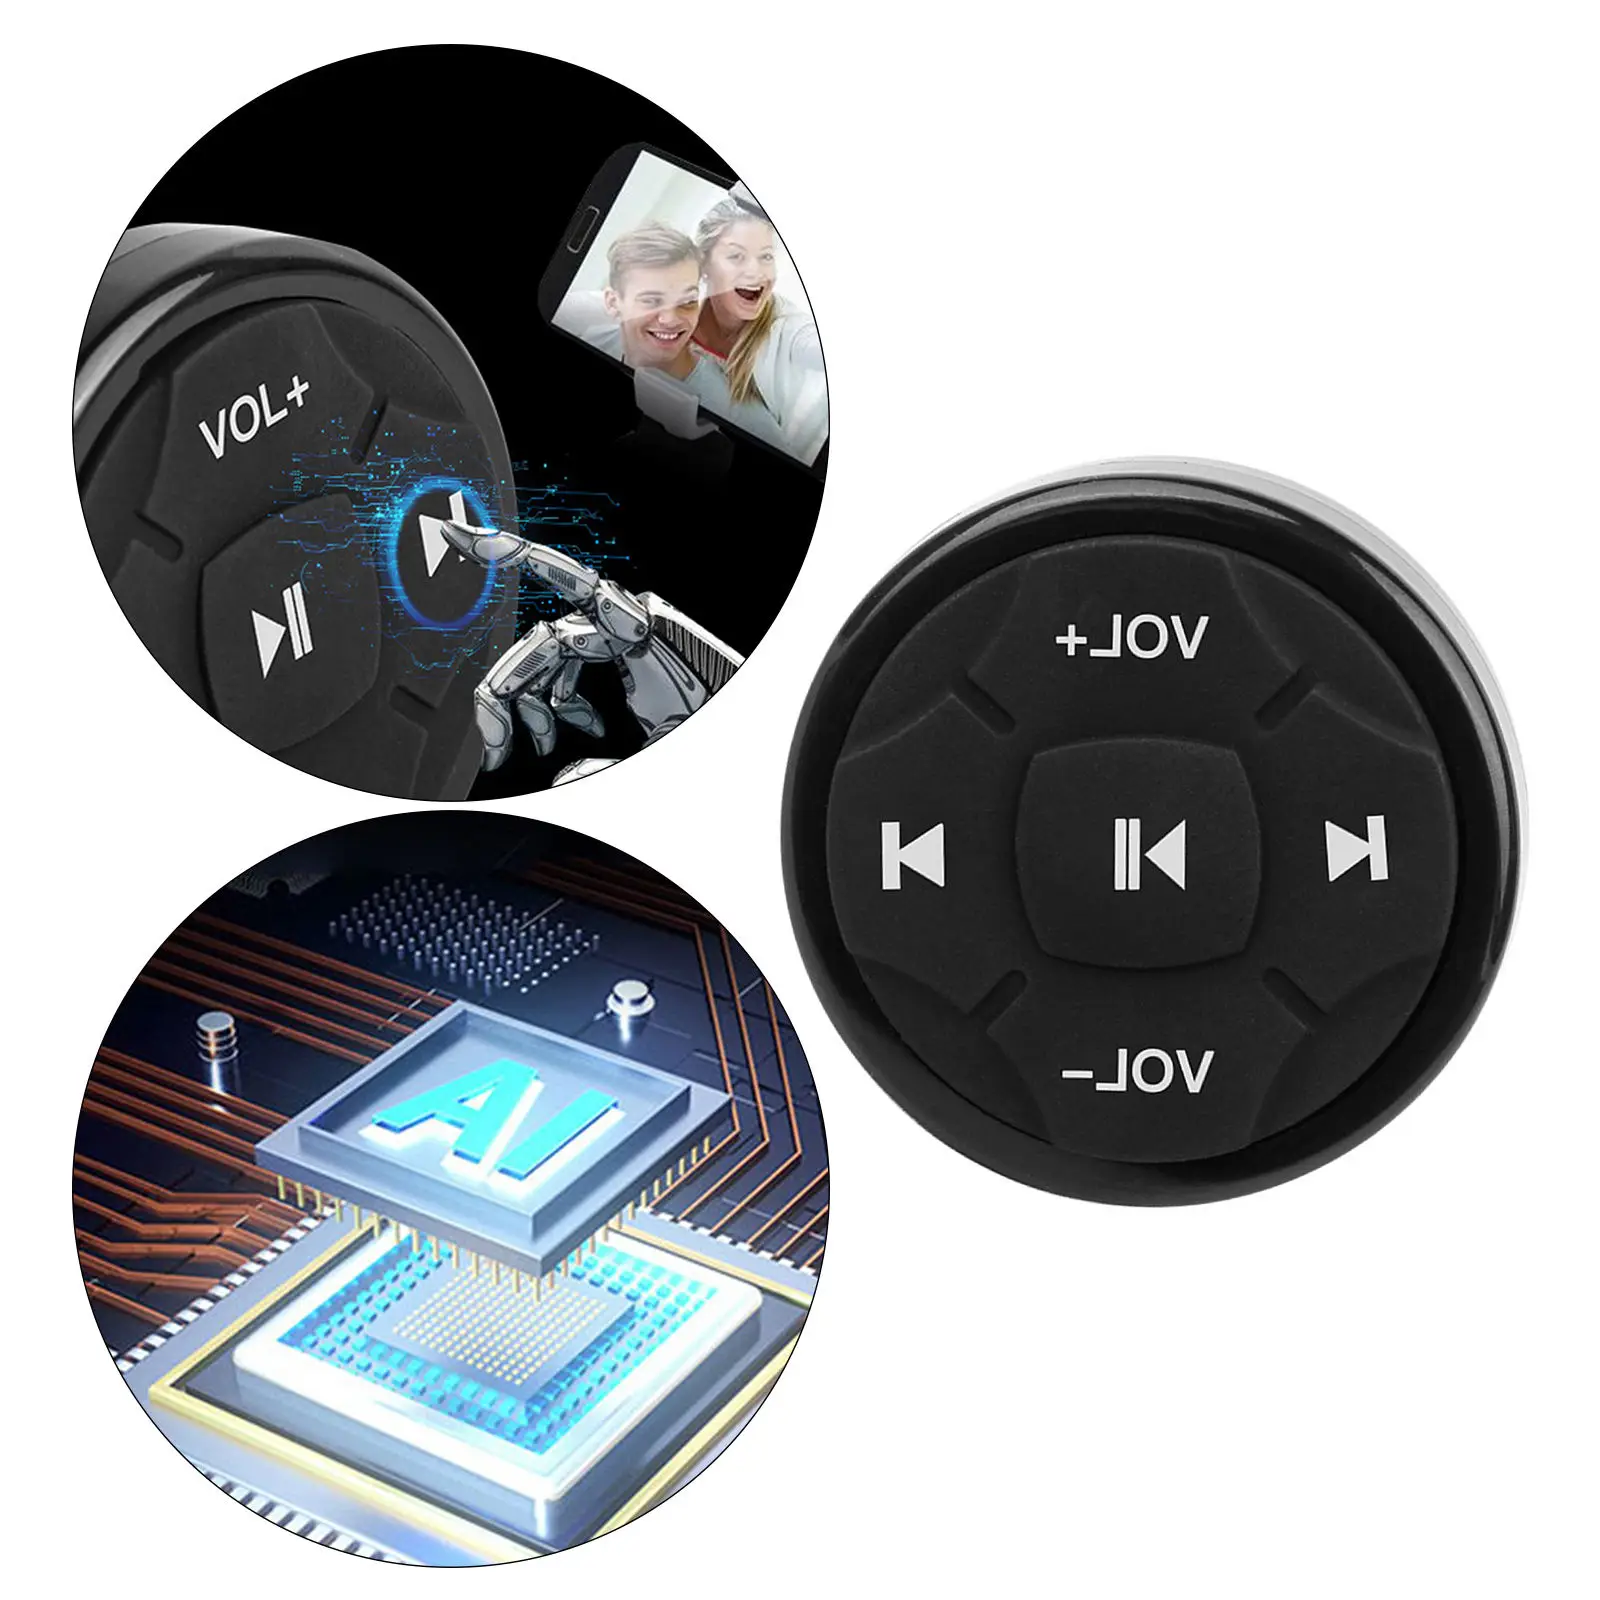 Wireless Bluetooth Media Button Stereo Audio Wireless Music Controller Remote Control Kit for iPhone or Android